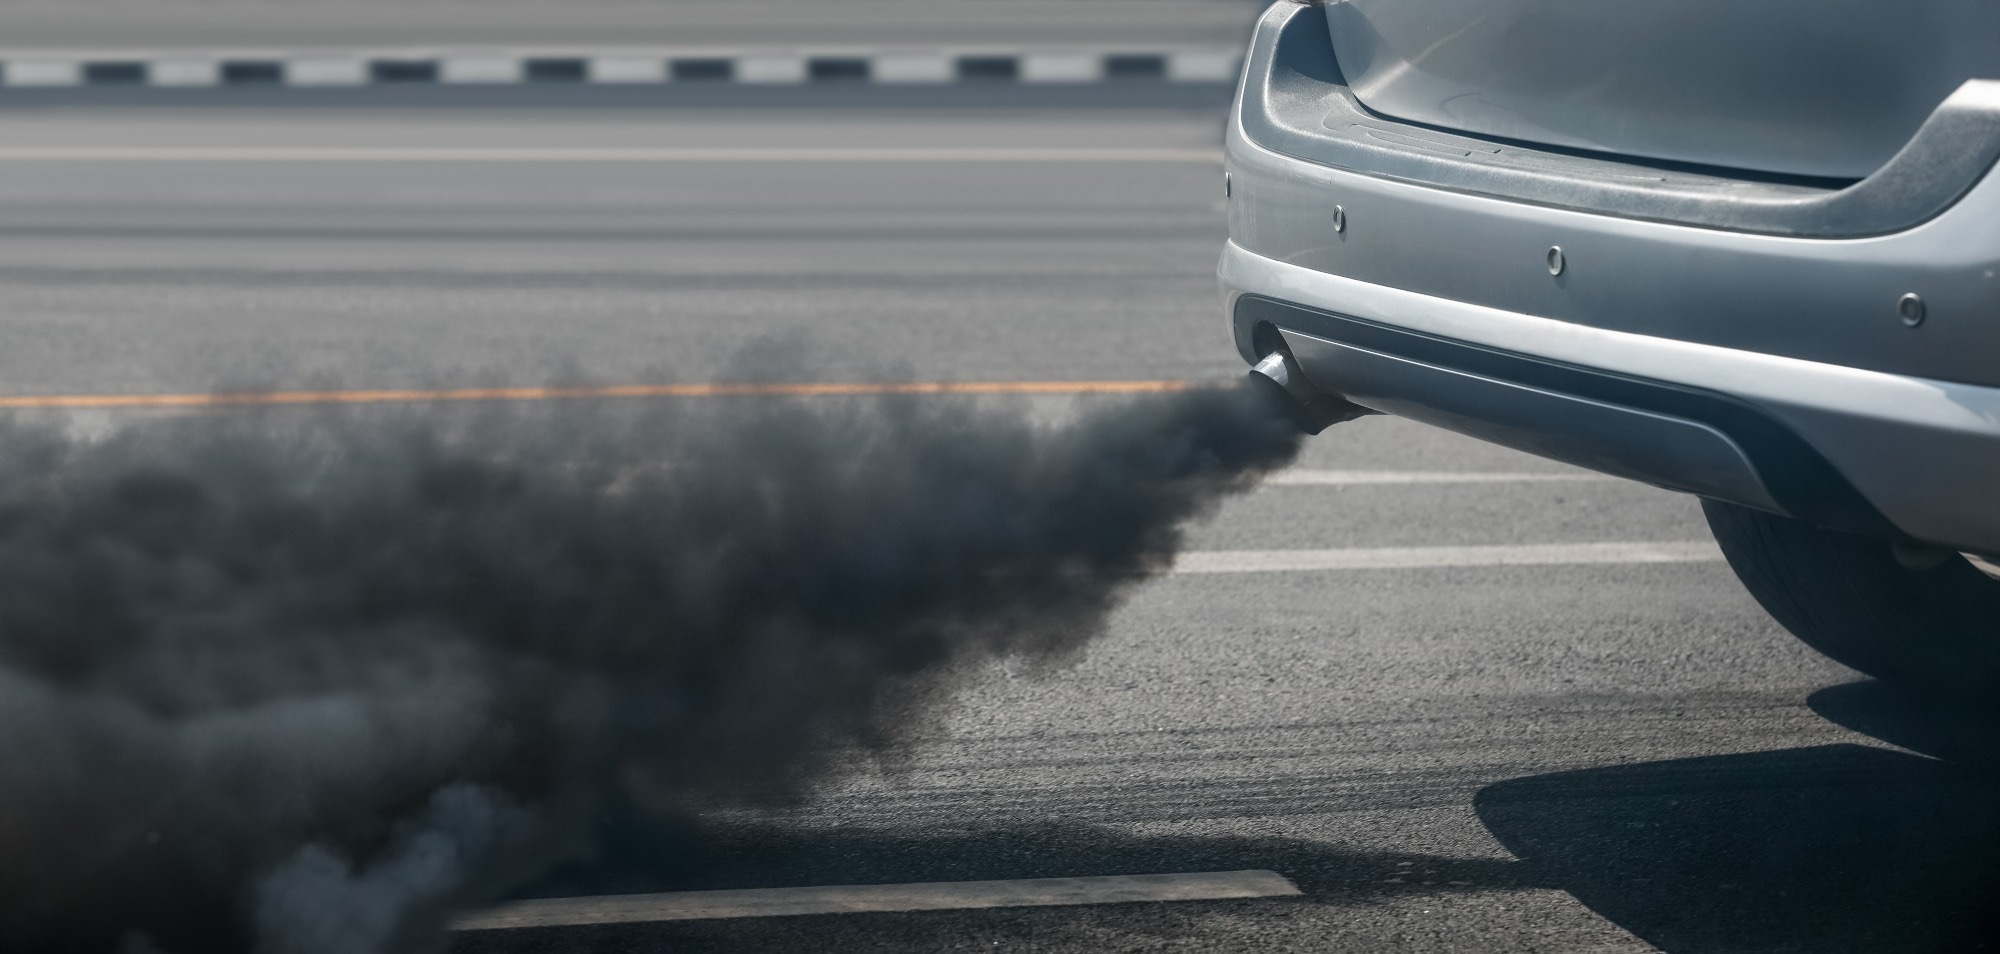 Study: Long-Term Exposure to Air Pollution and COVID-19 Vaccine Antibody Response in a General Population Cohort (COVICAT Study, Catalonia). Image Credit: Toa55 / Shutterstock